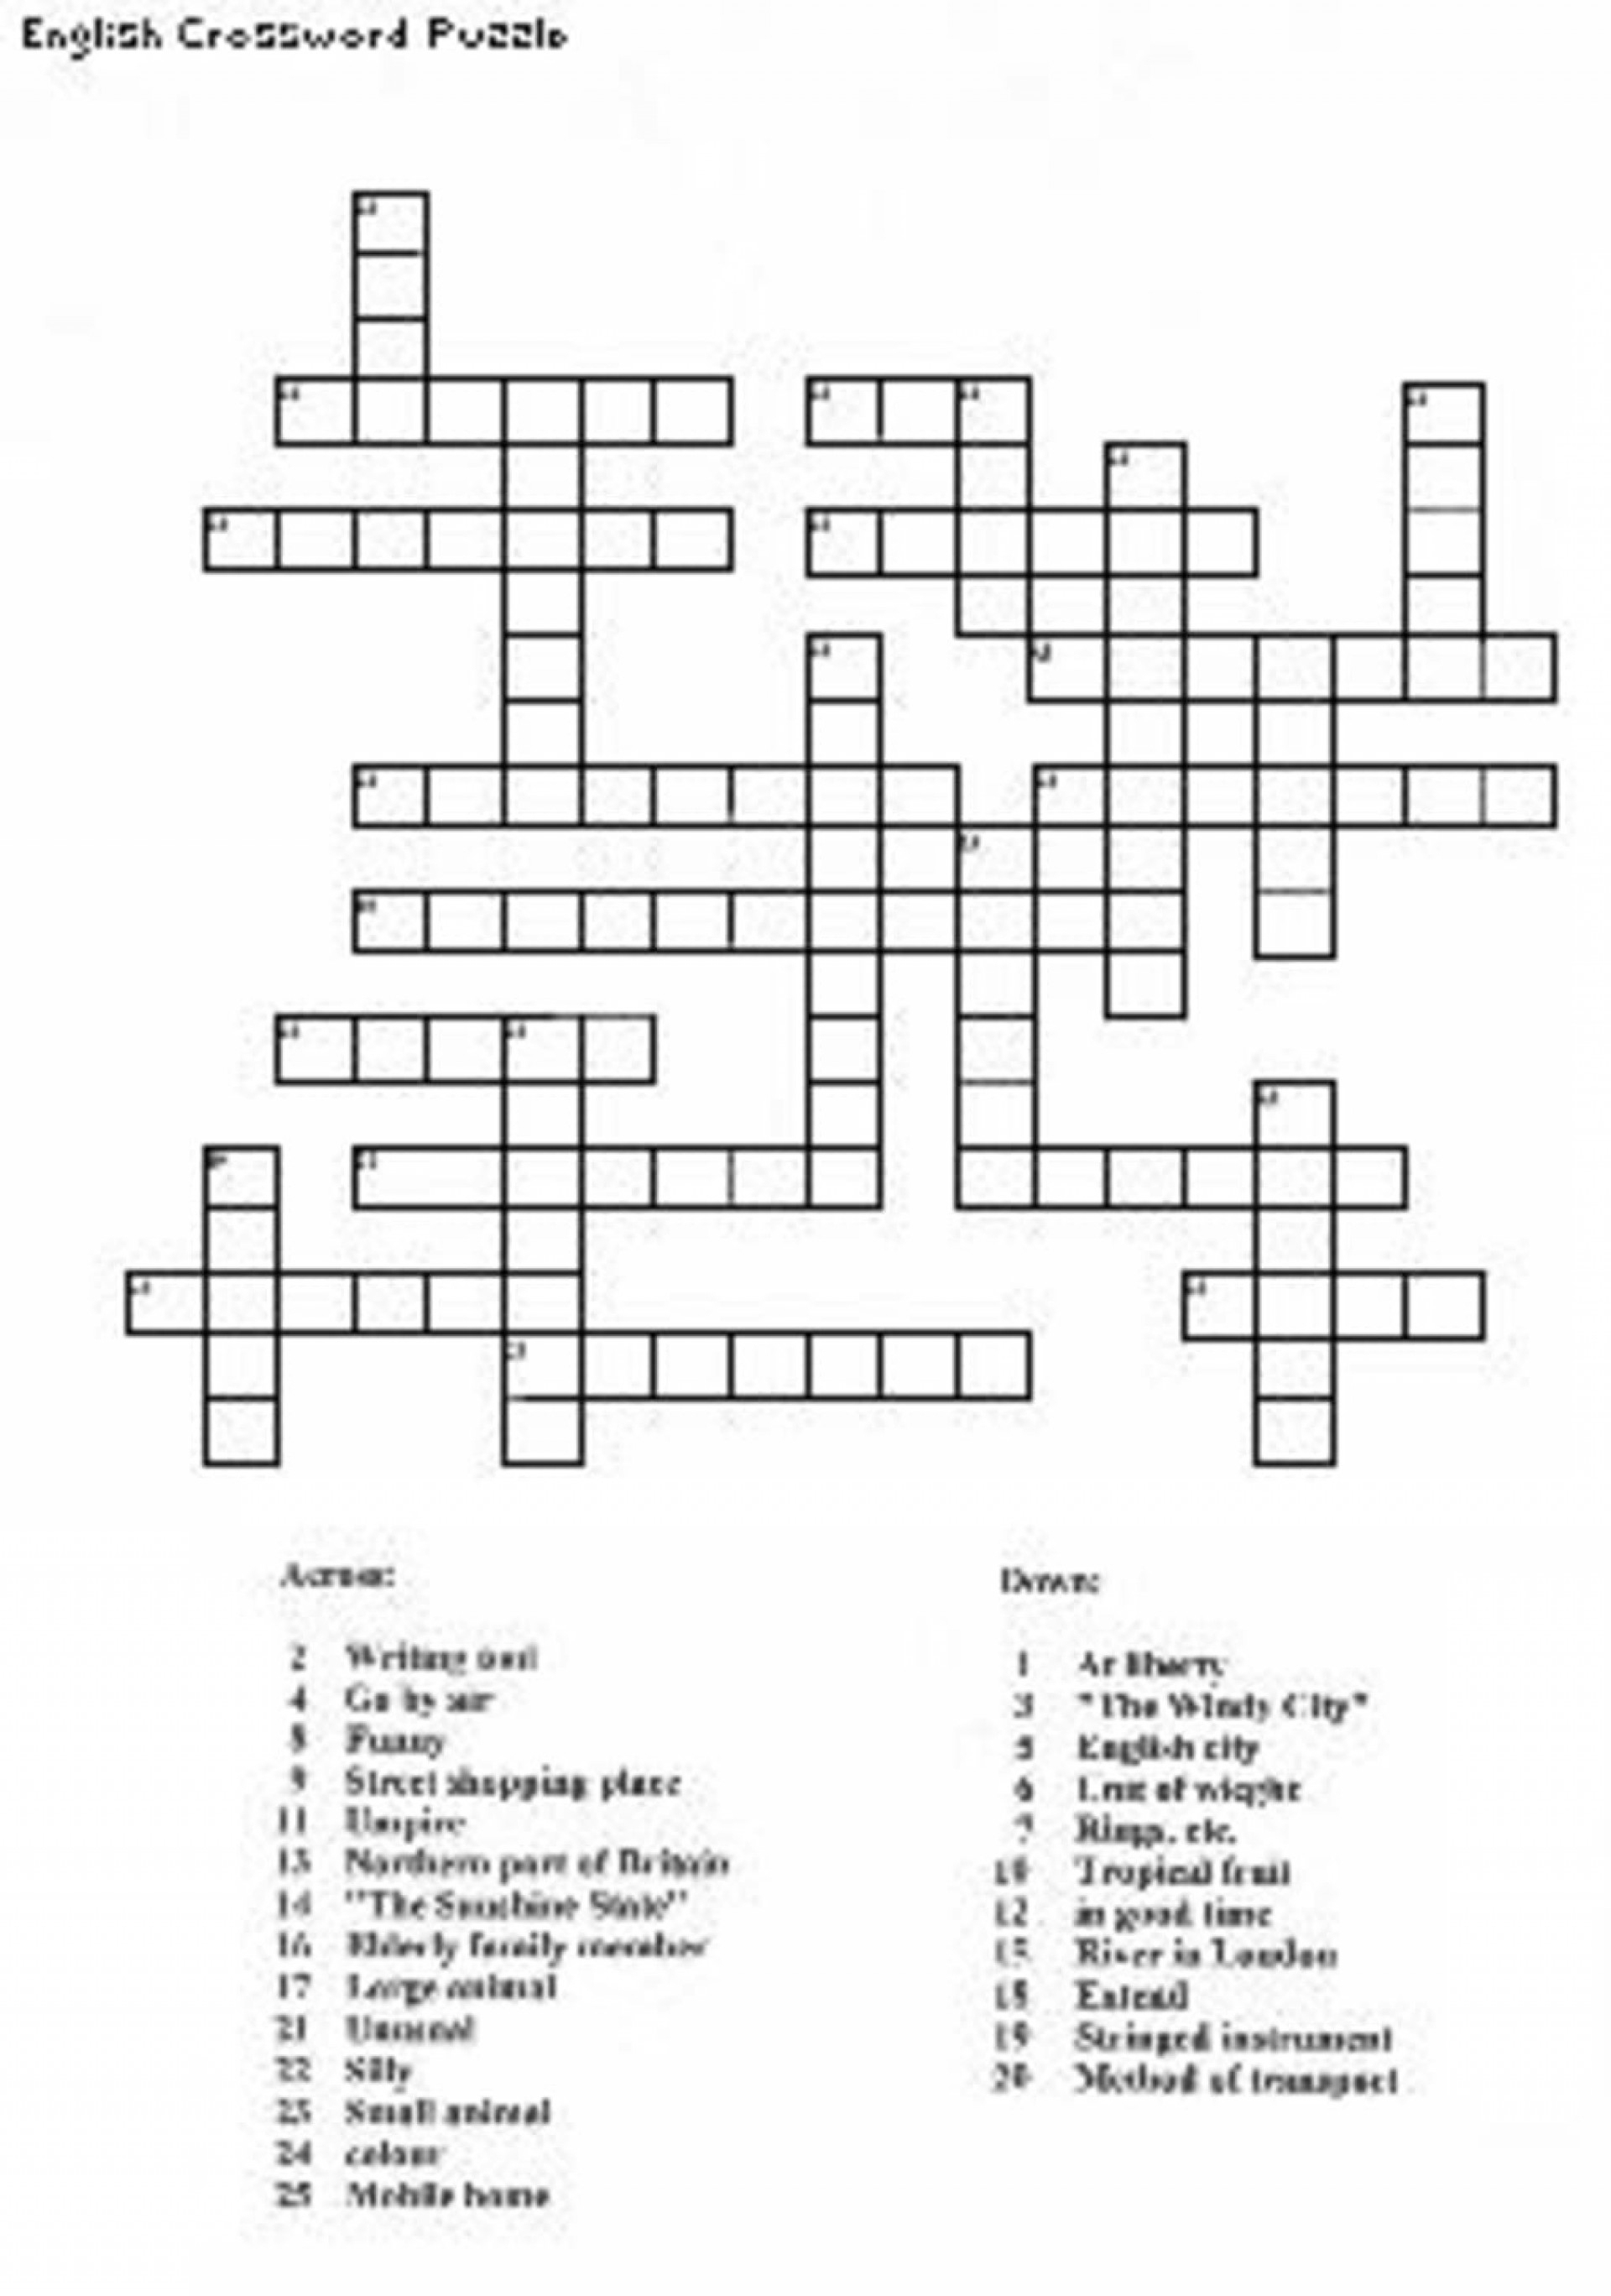 Make Your Own Crossword Puzzle Free Printable - Printable Crossword Puzzles